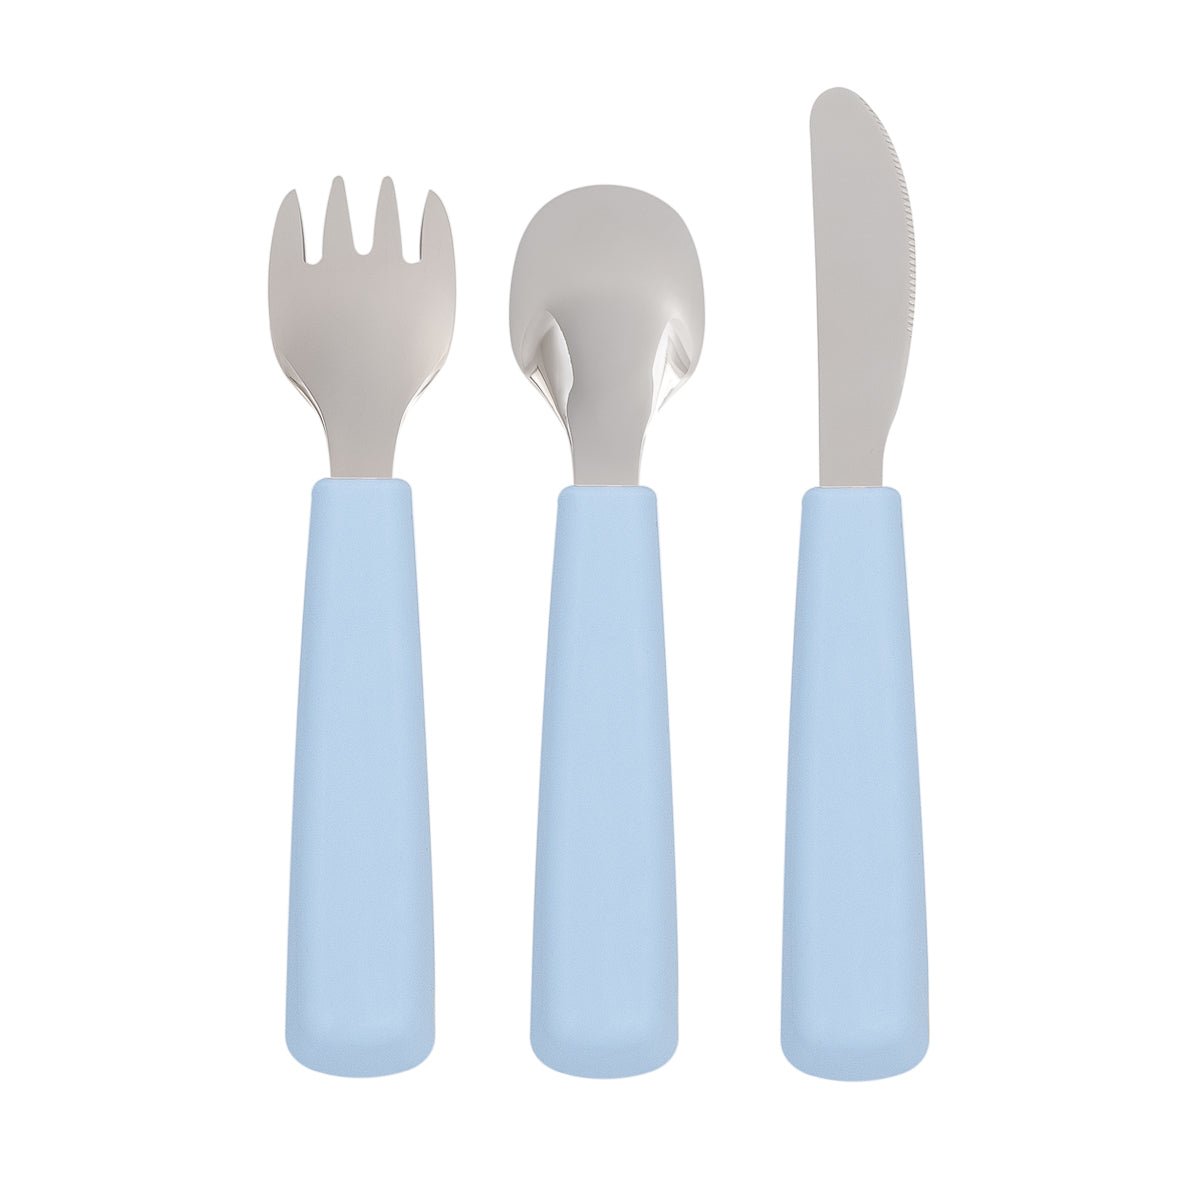 Toddler Feedie Cutlery Set | We Might Be Tiny